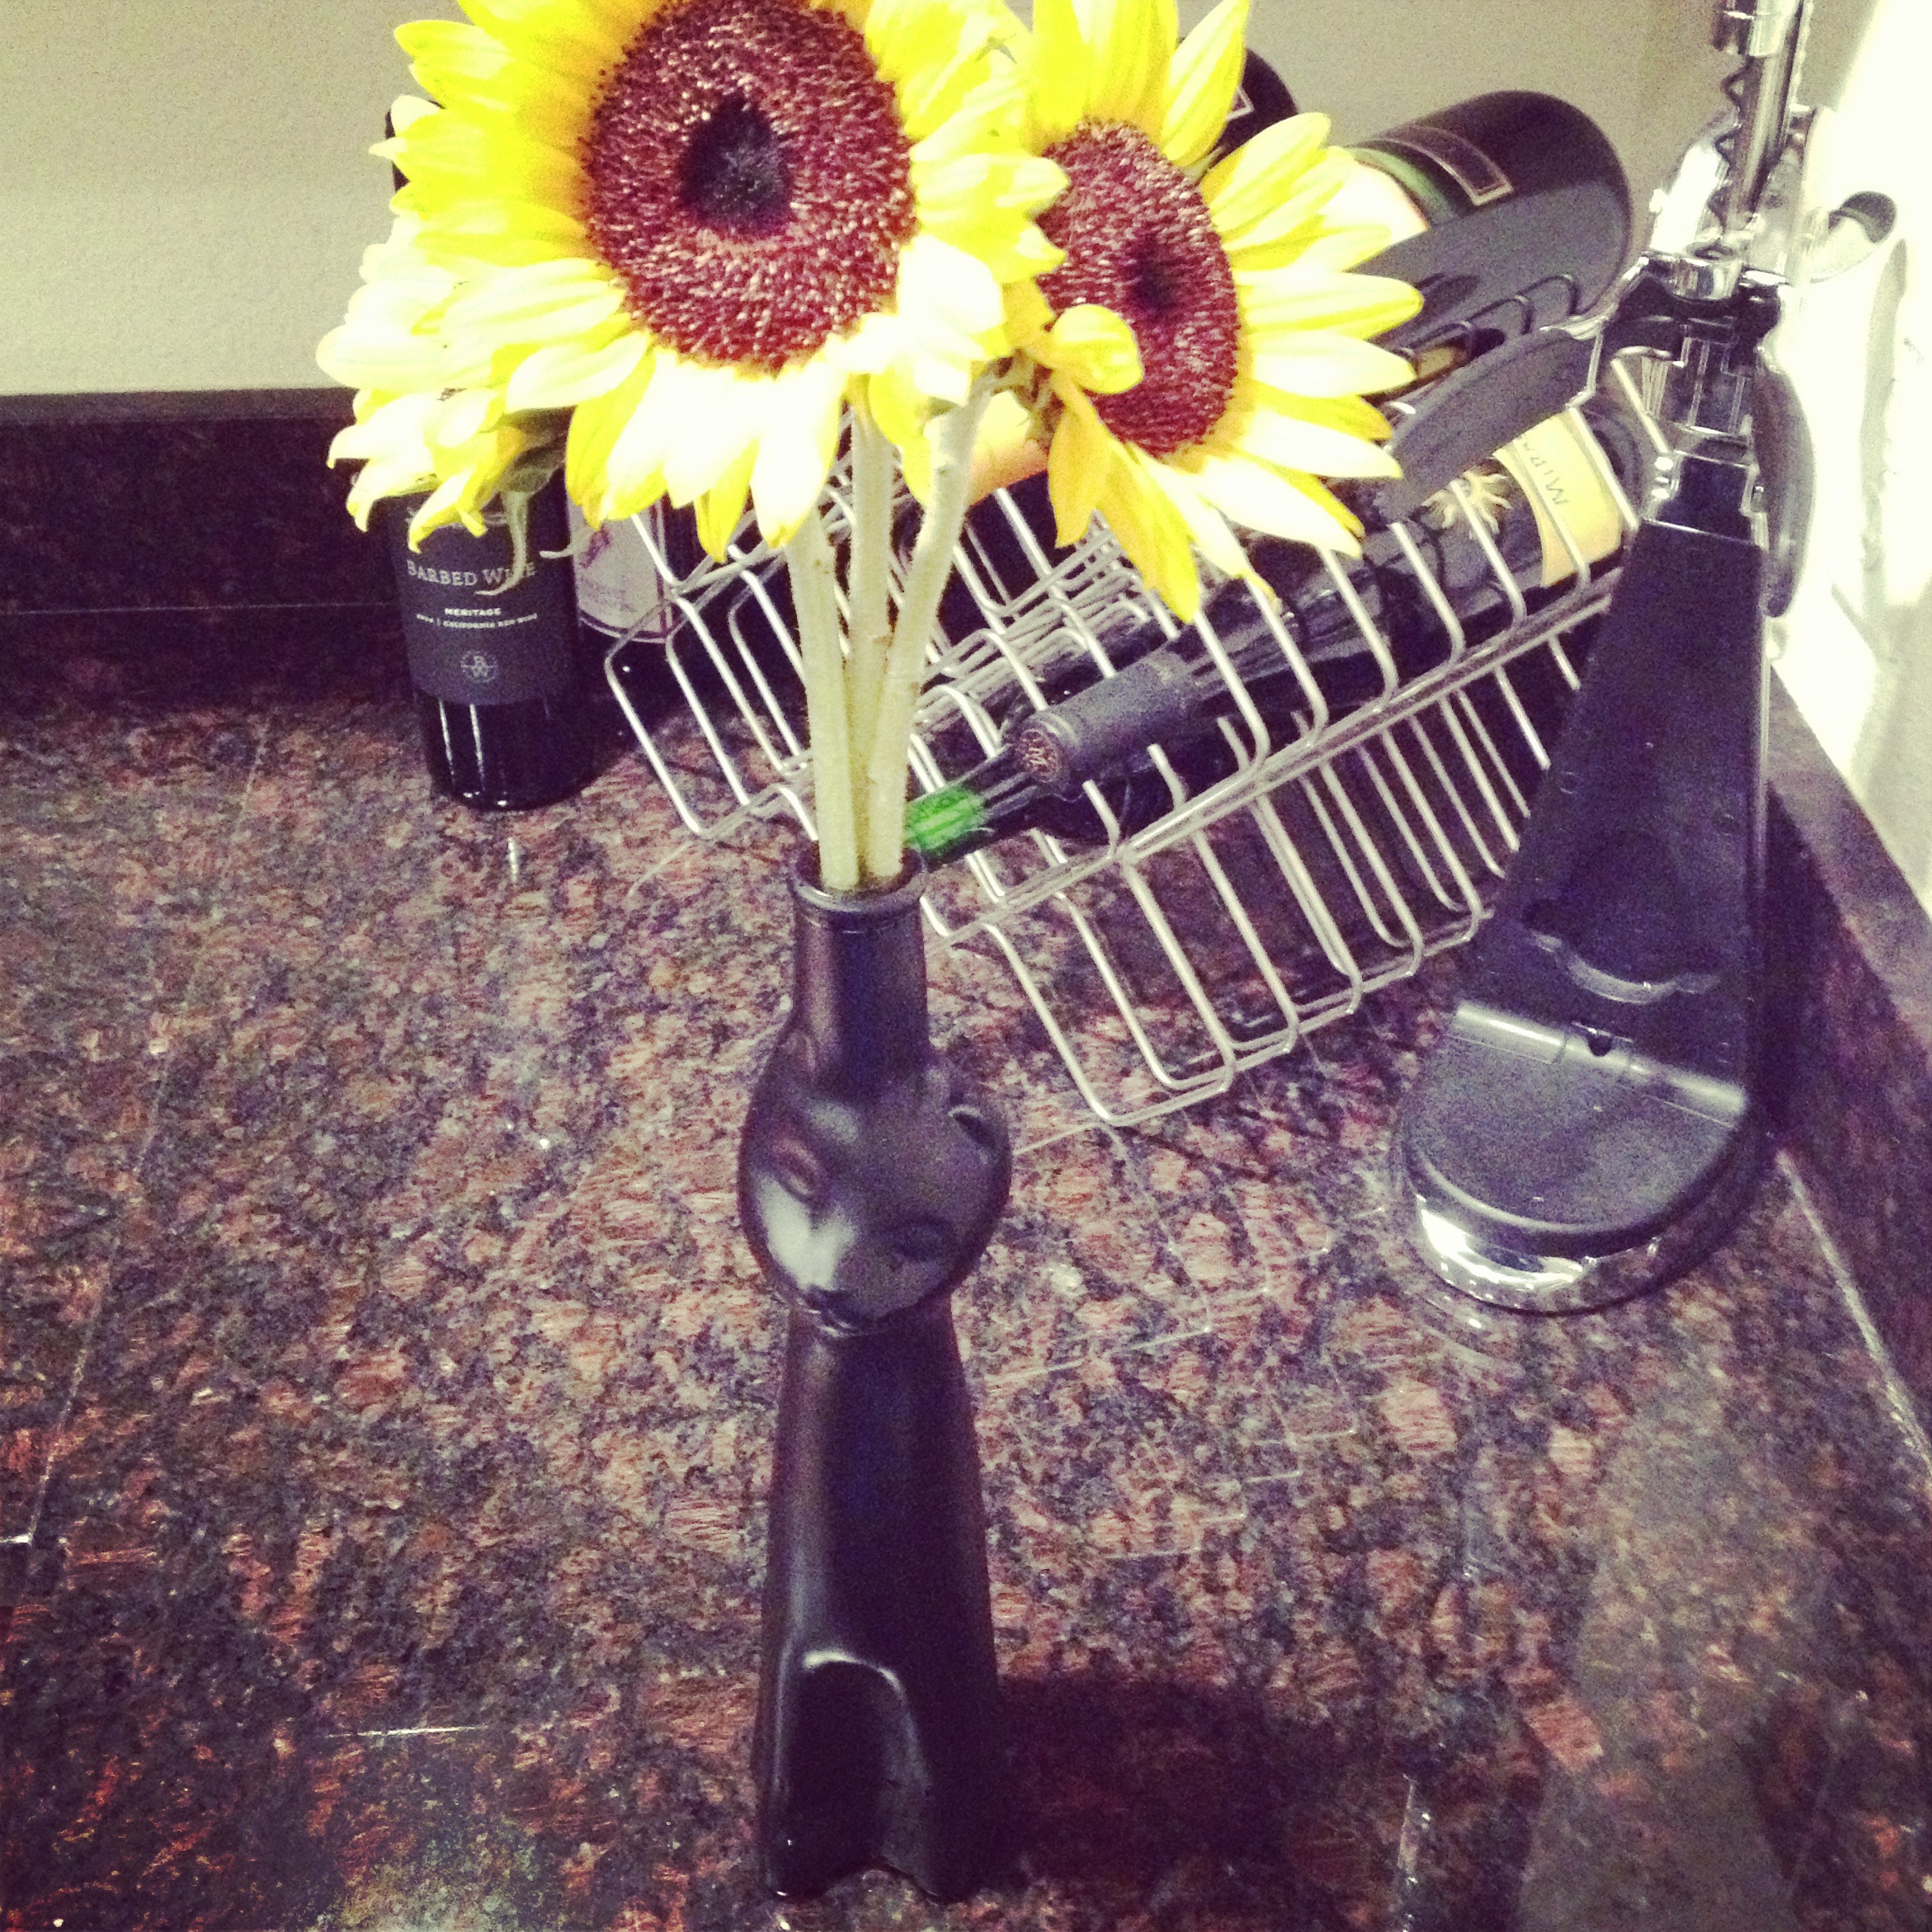 Wordless Wednesday - Sunflowers in a Cat Wine Bottle